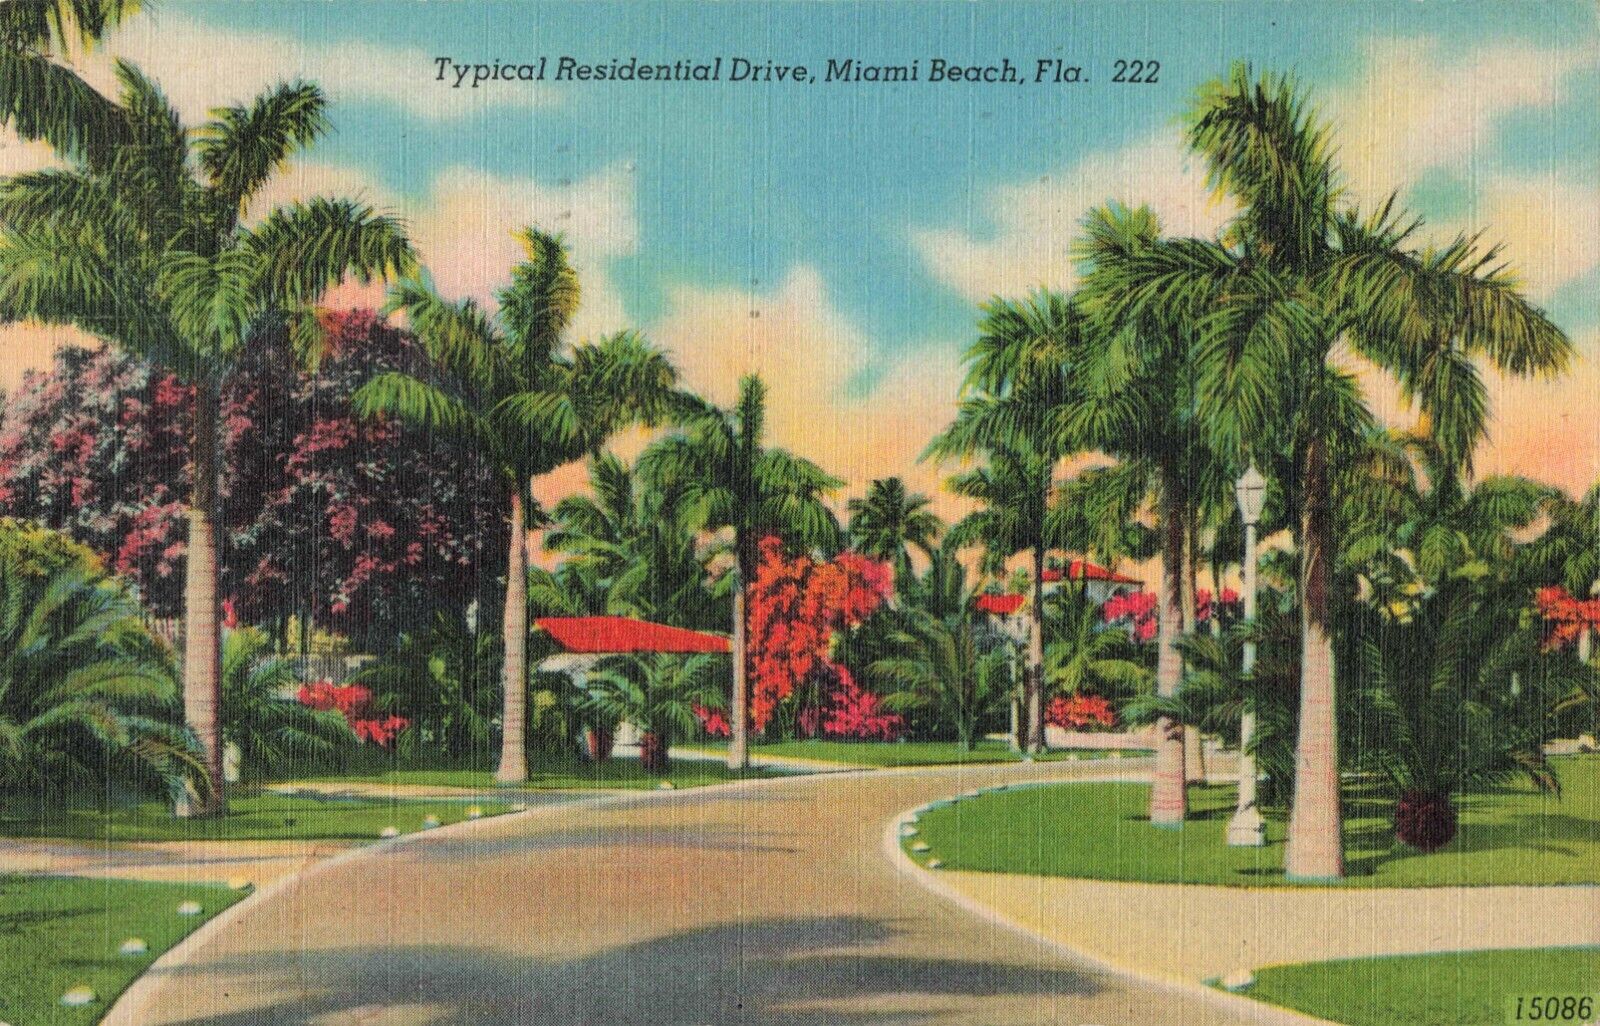 Miami Beach FL Florida, Typical Palm Lined Residential Drive, Vintage Postcard